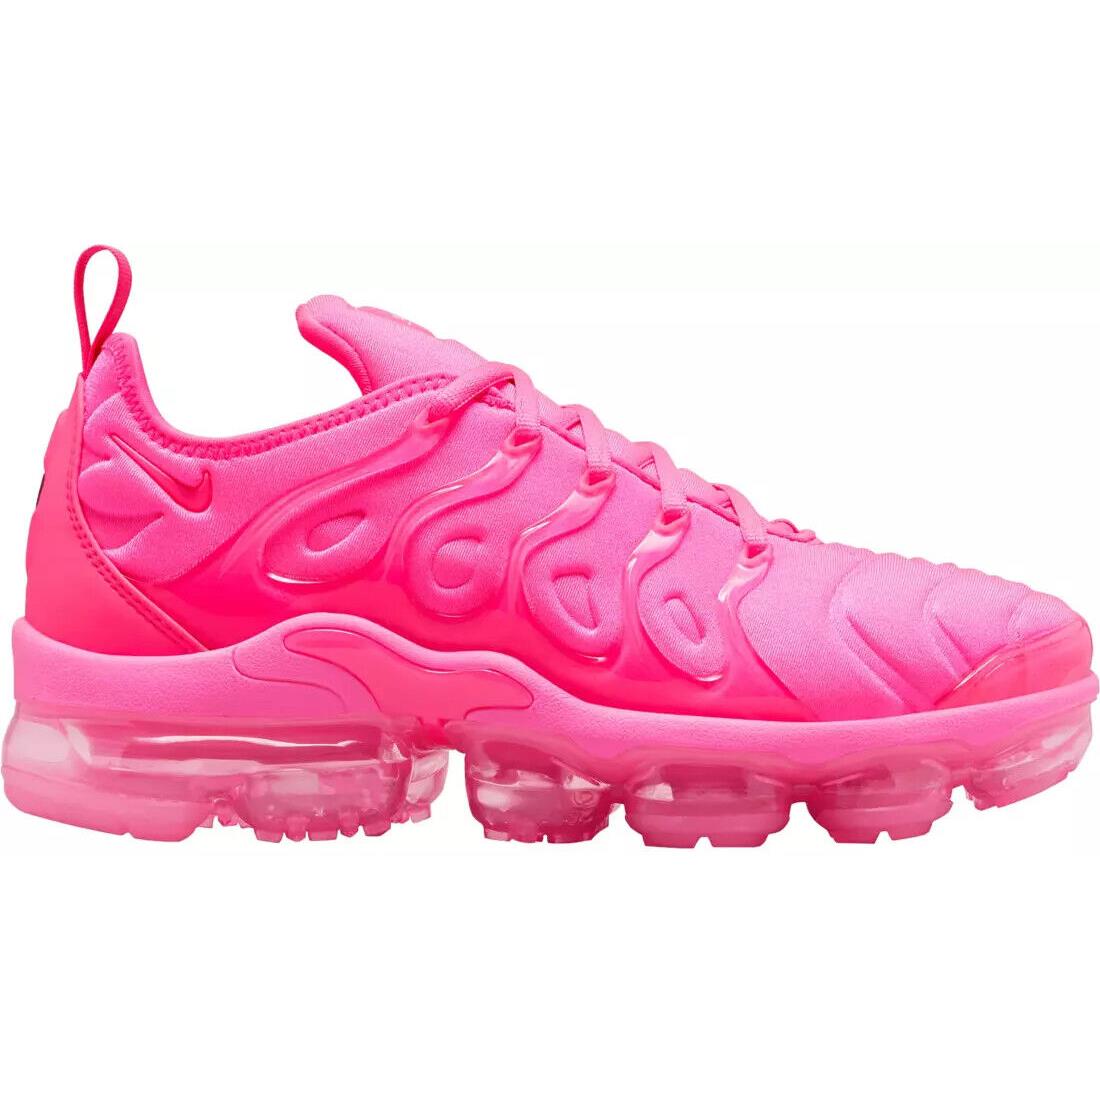 Nike Air Vapormax Plus Women`s Running Shoes All Colors US Sizes 6-11 Hyper Pink/White/Pink Blast/Hyper Pink